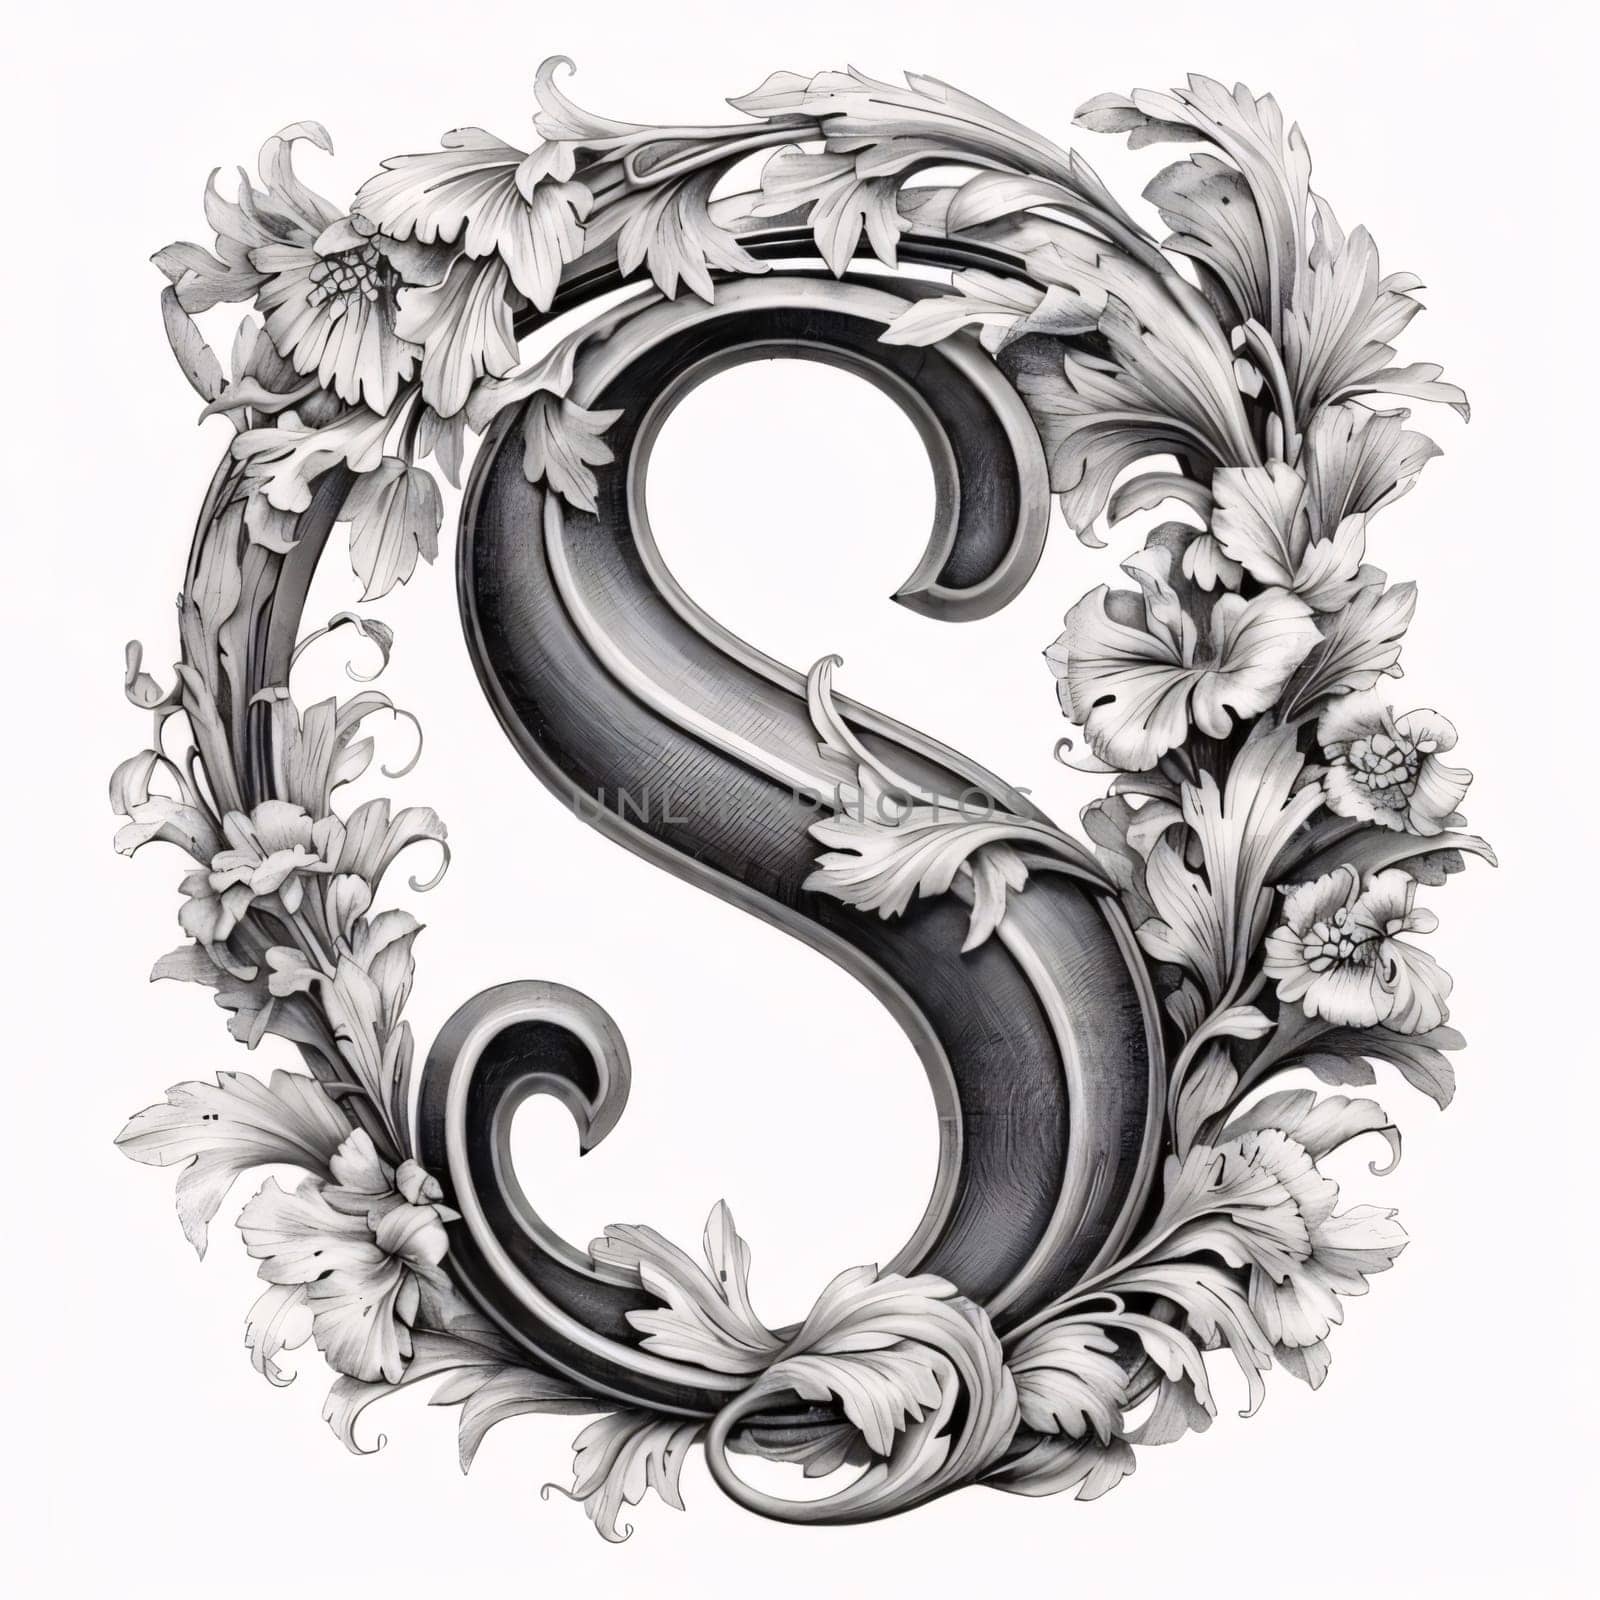 Graphic alphabet letters: Elegant capital letter S with floral ornament. Hand-drawn illustration.